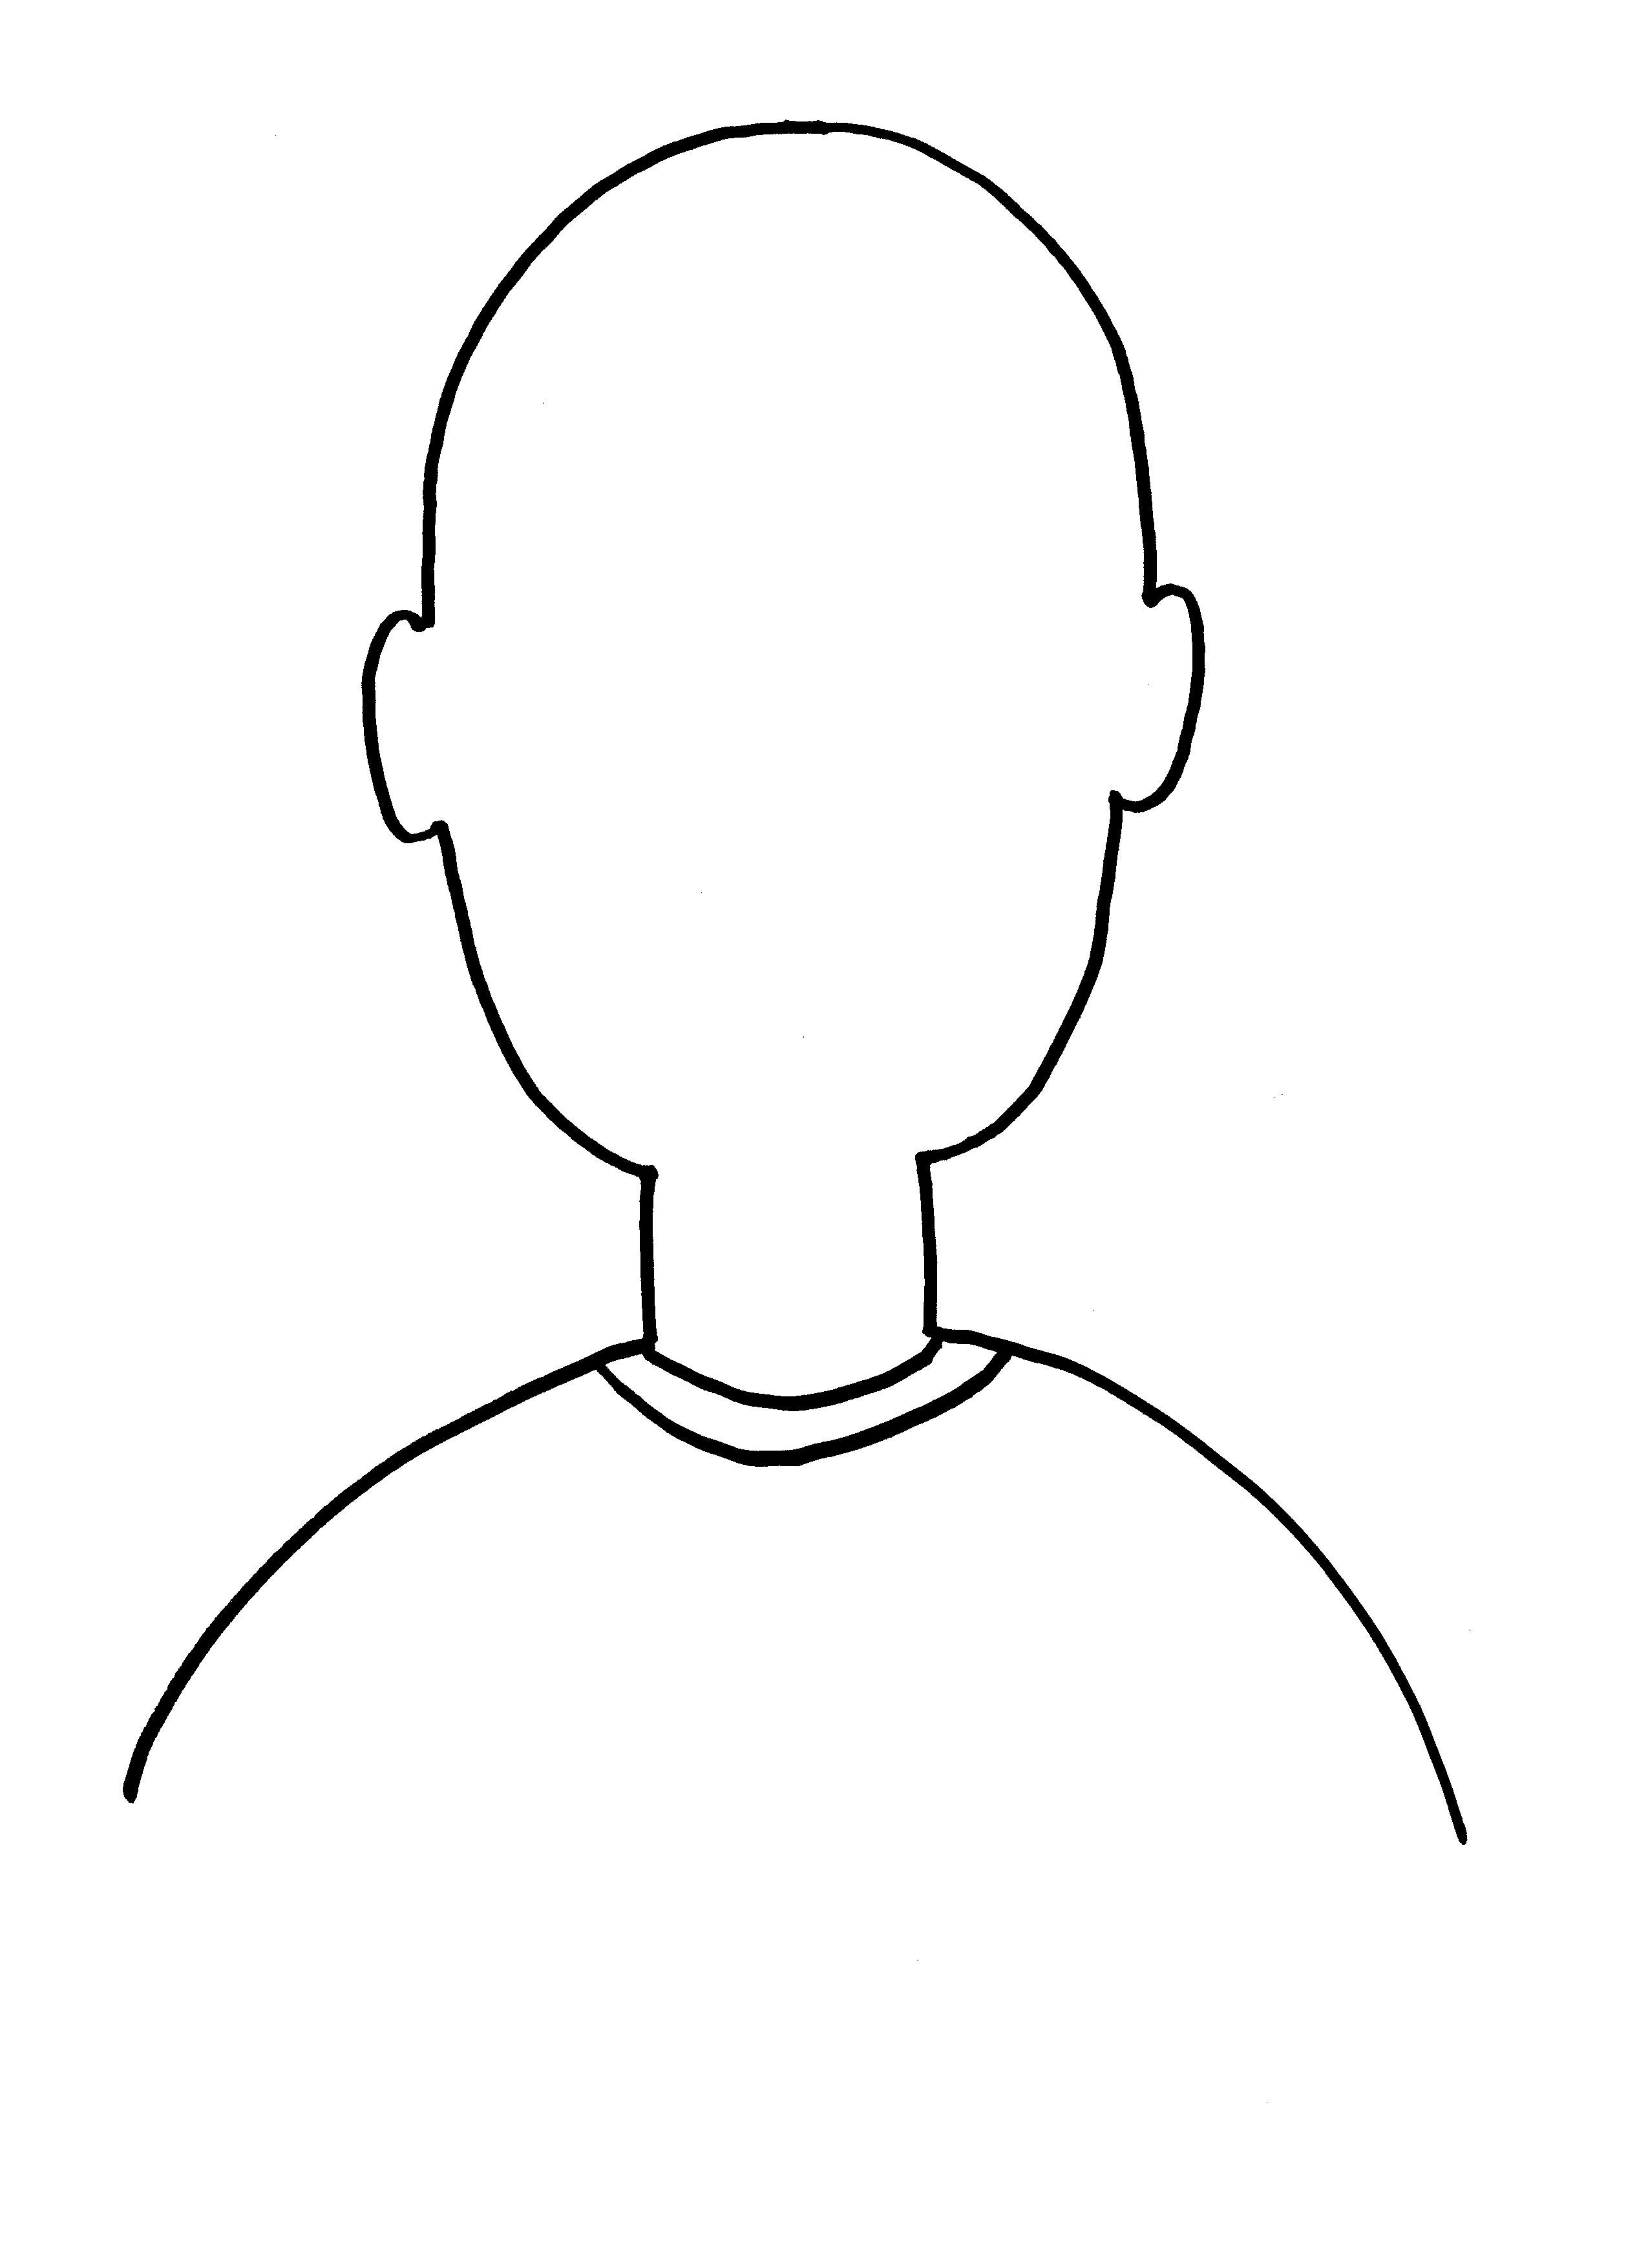 Blank Head Template - Clipart library